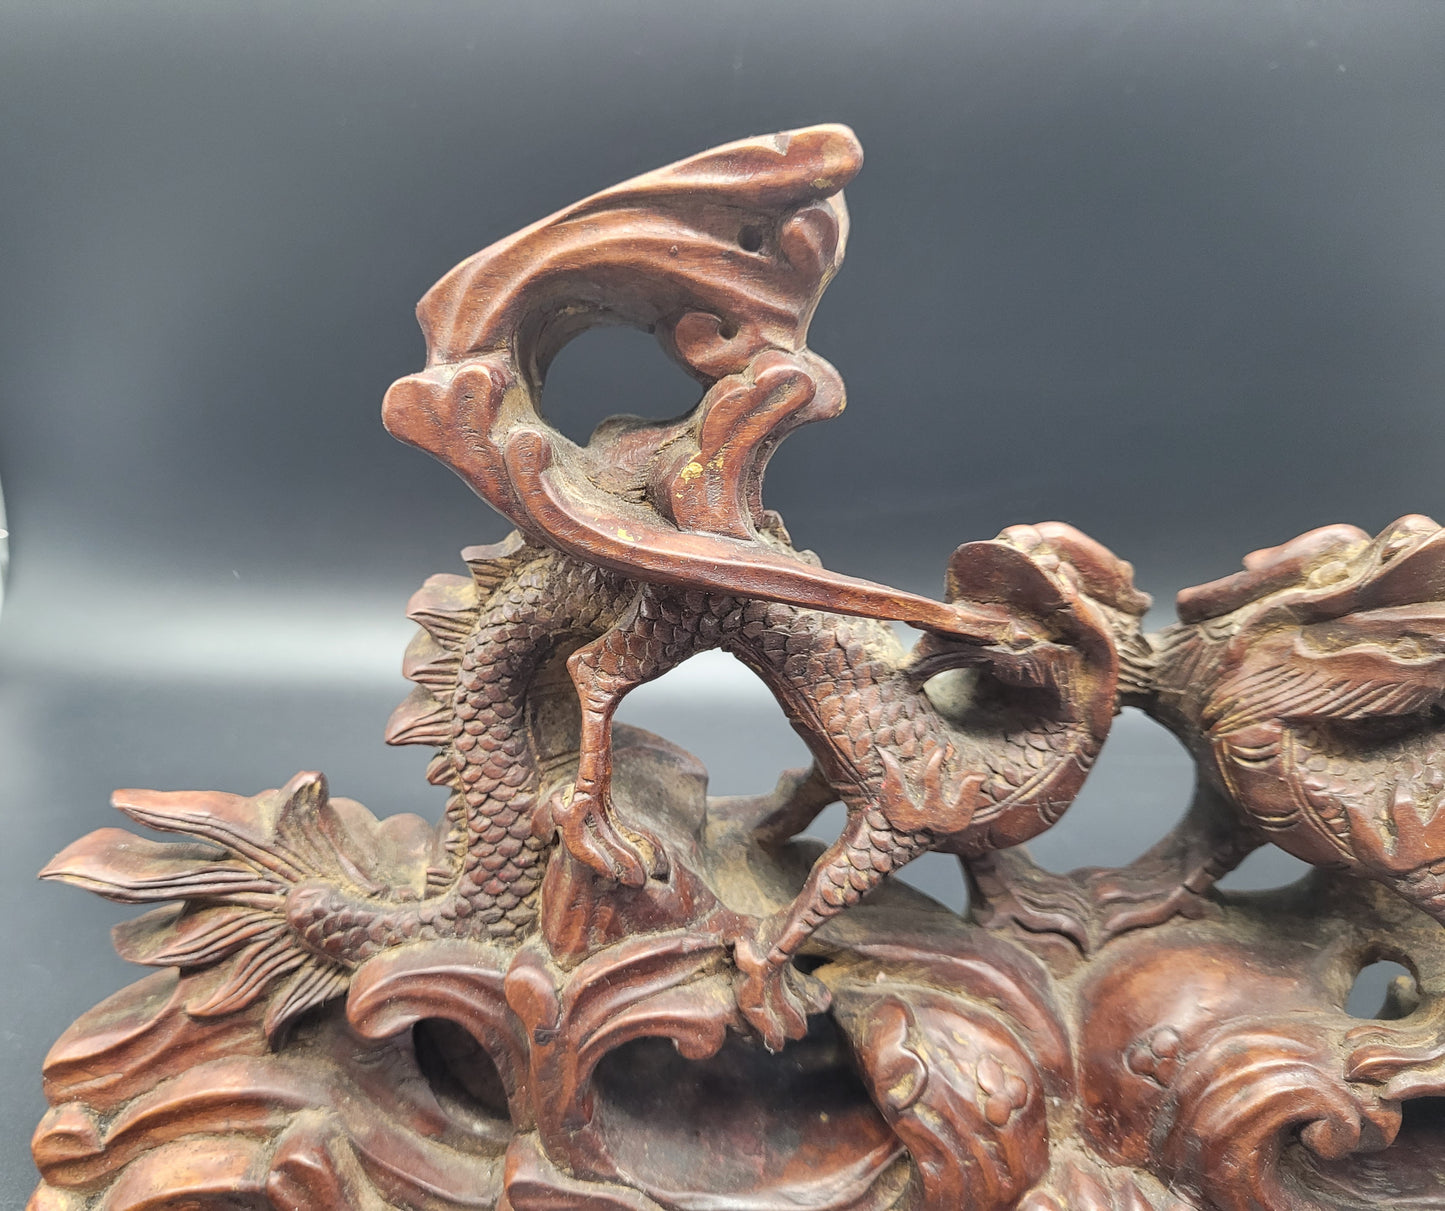 Chinese Qing Carved Dragon Incense Stand 19th Century